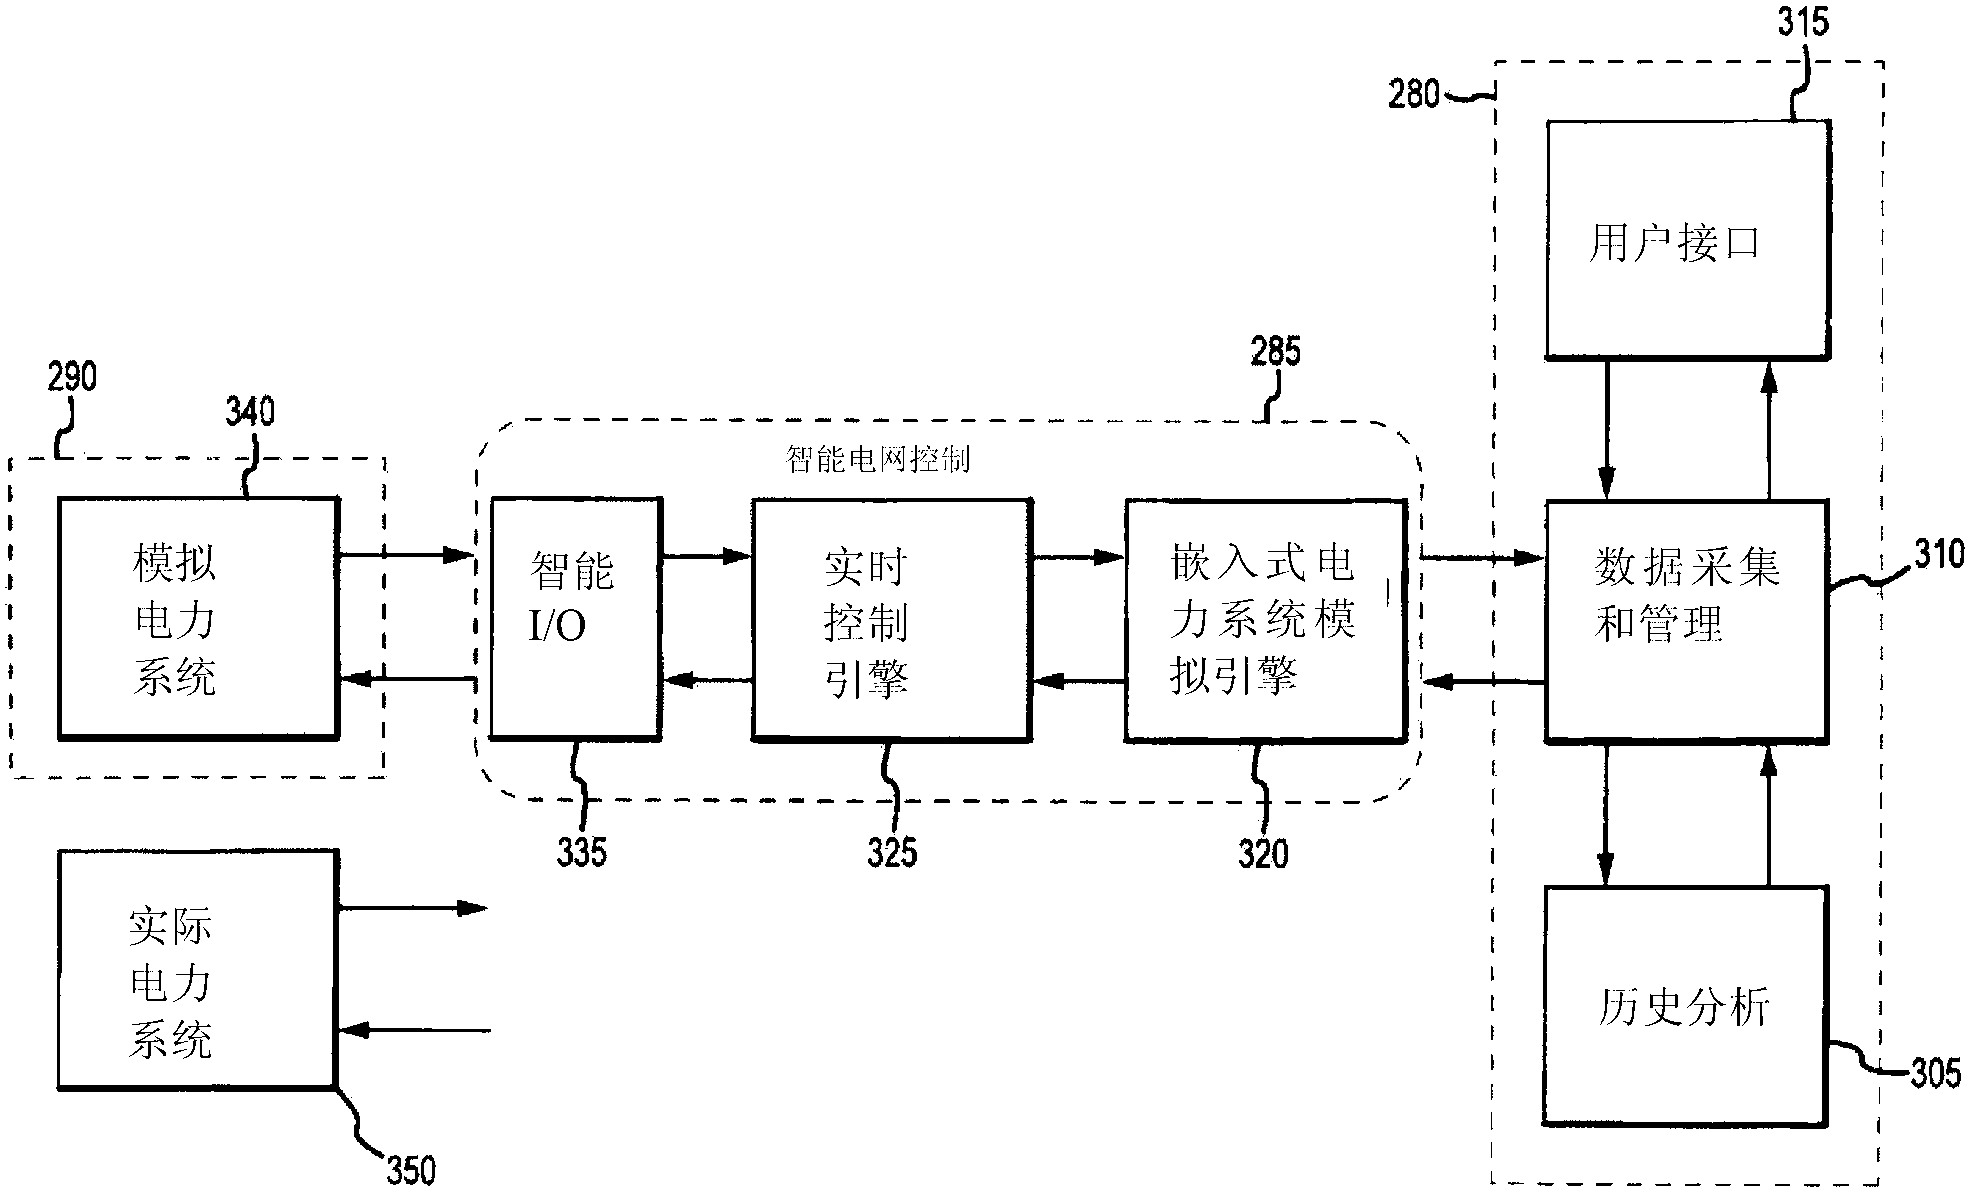 Dynamic distributed power grid control system